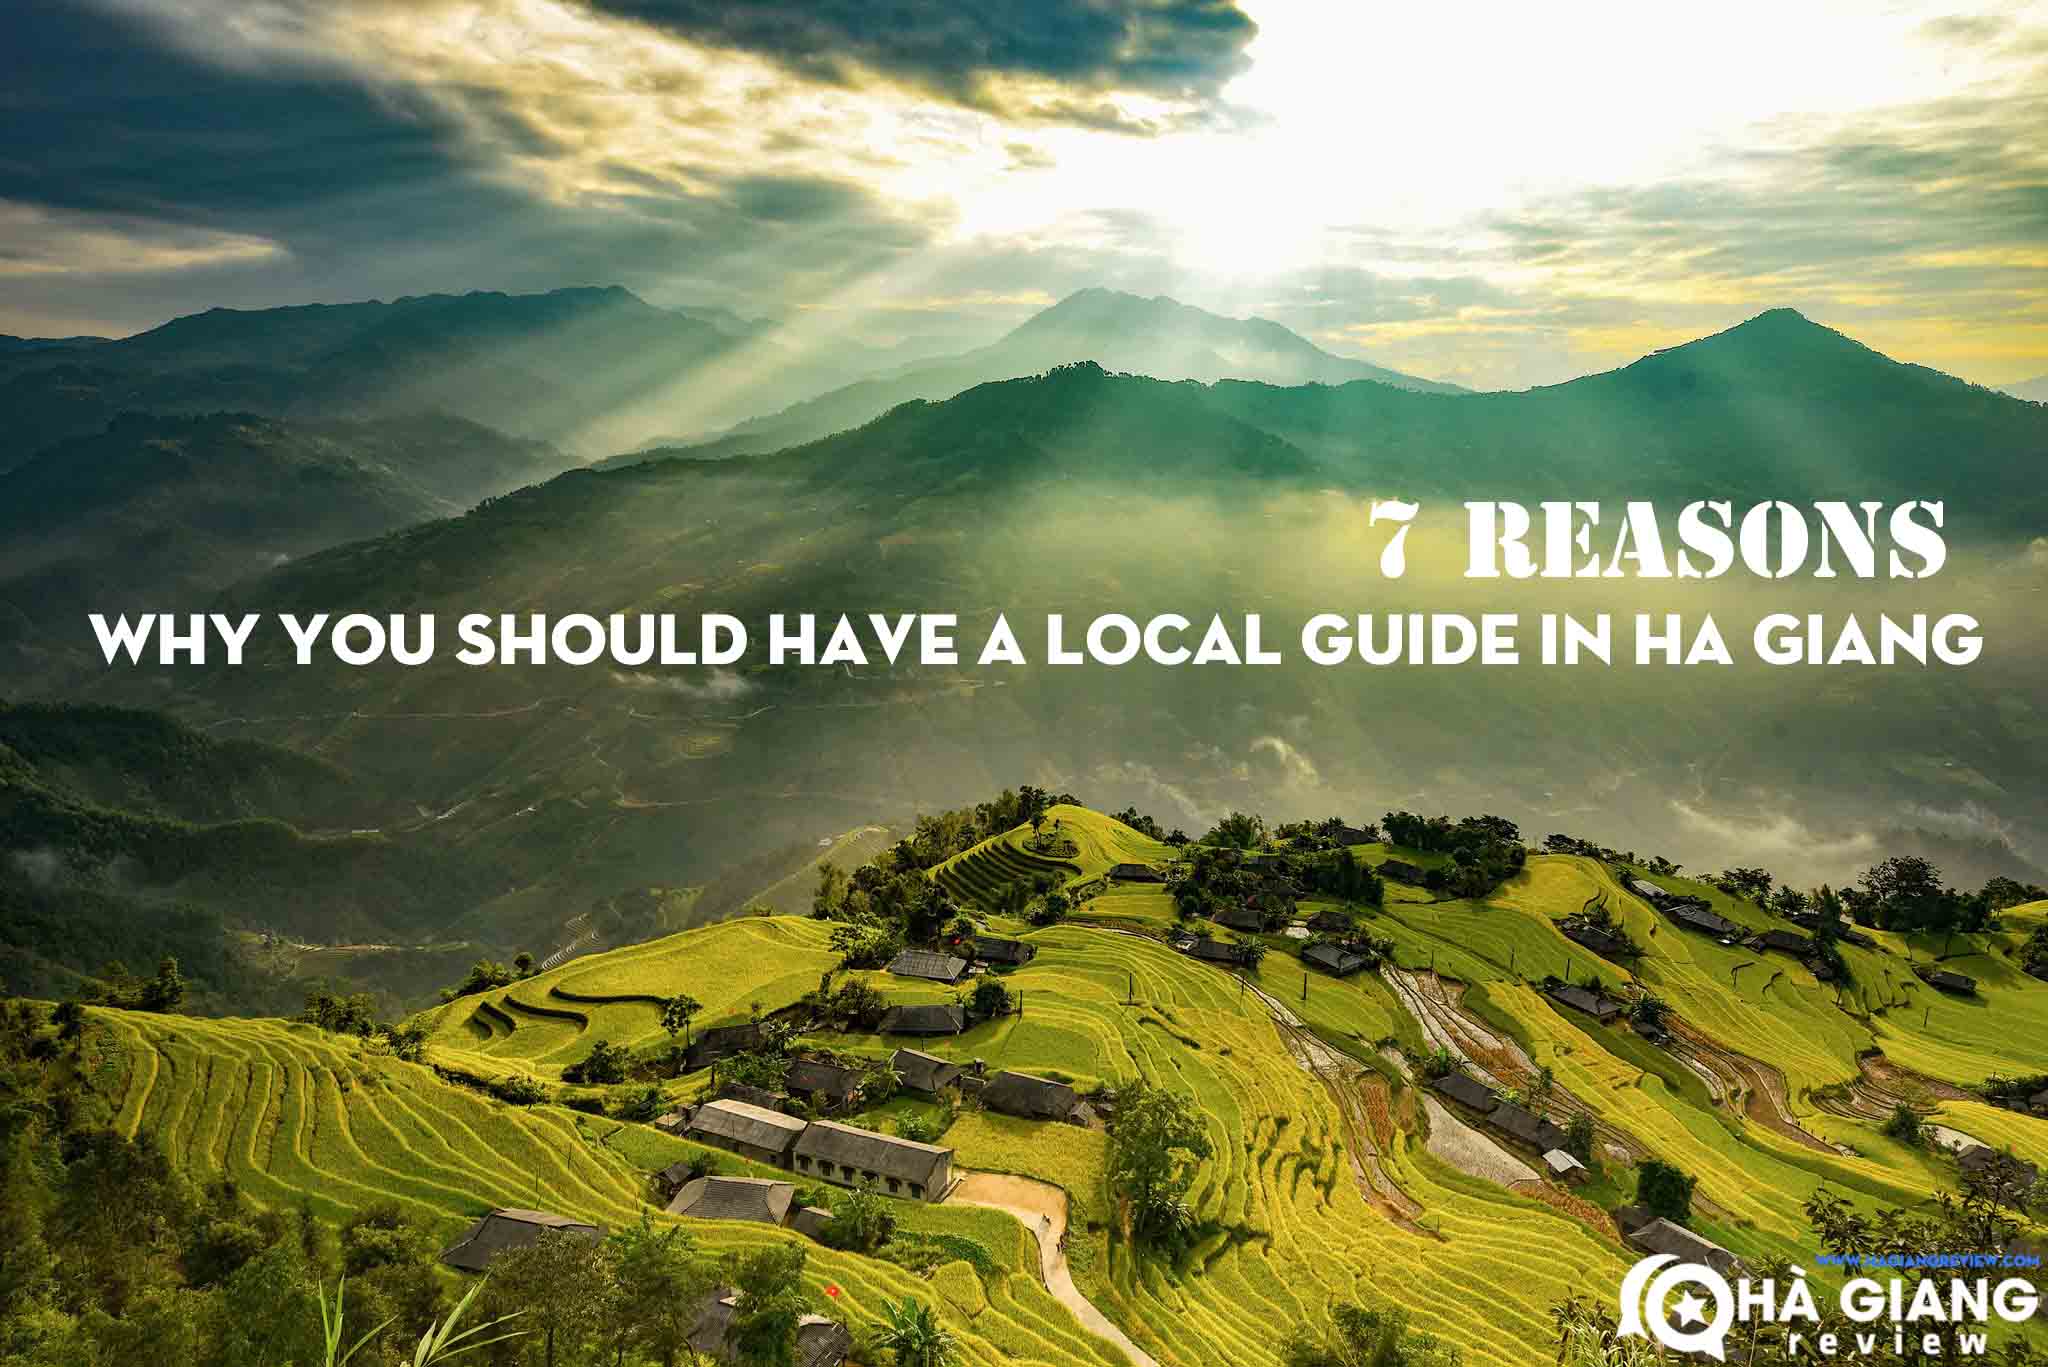 7 reasons why you should have a local guide in Ha Giang